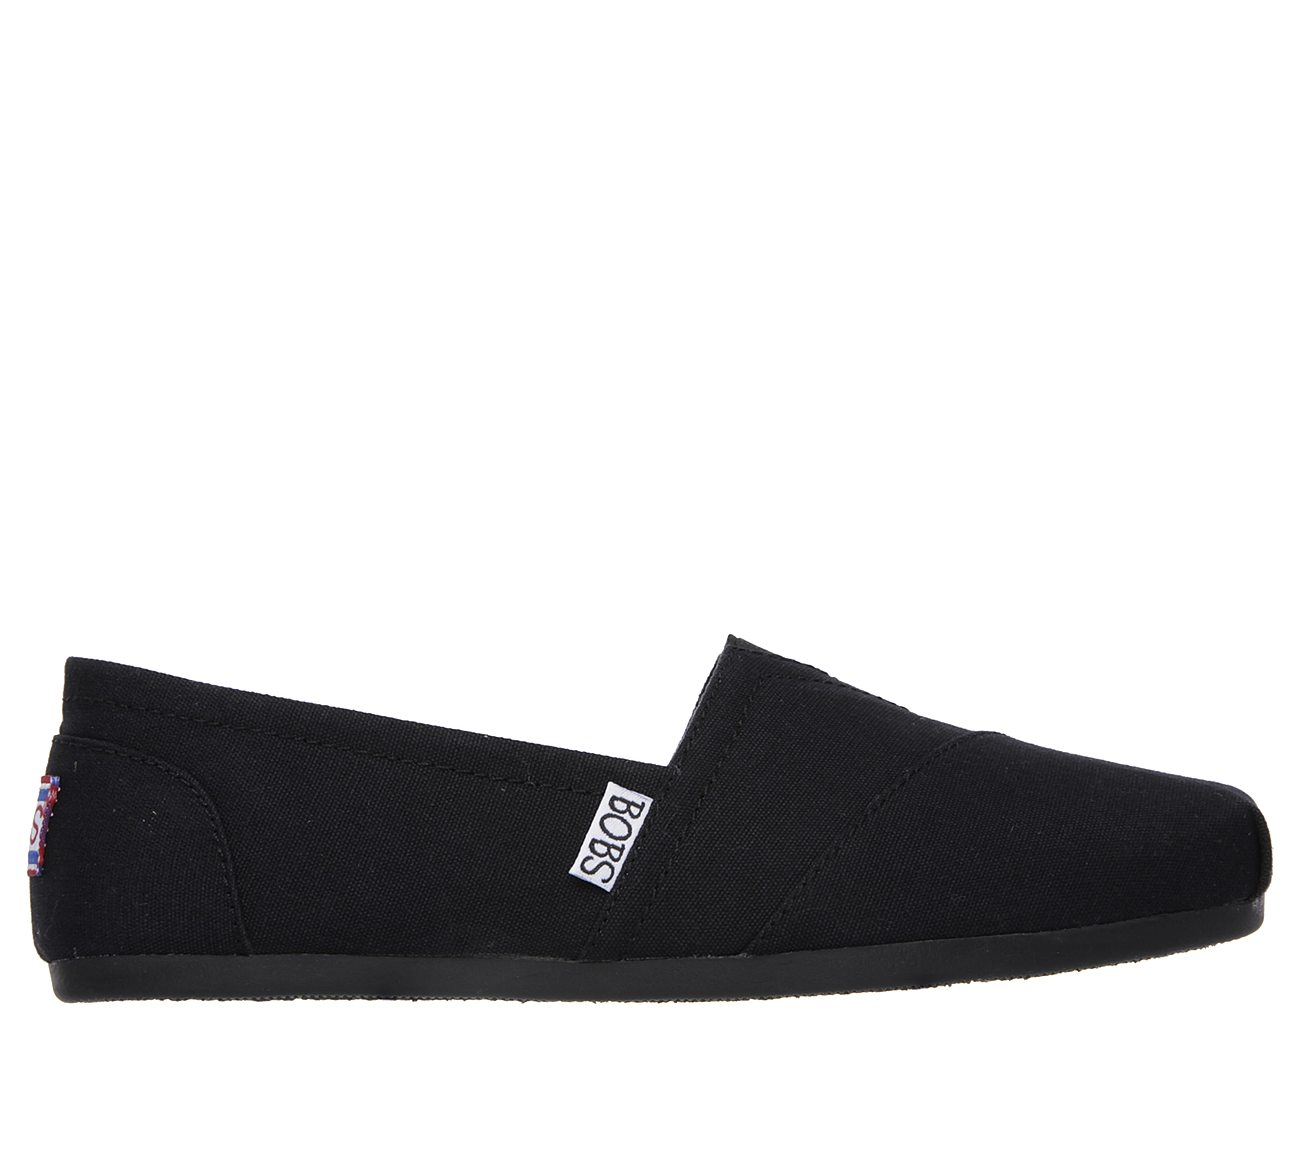 BOBS PLUSH - PEACE & LOVE, BBBBLACK Footwear Lateral View